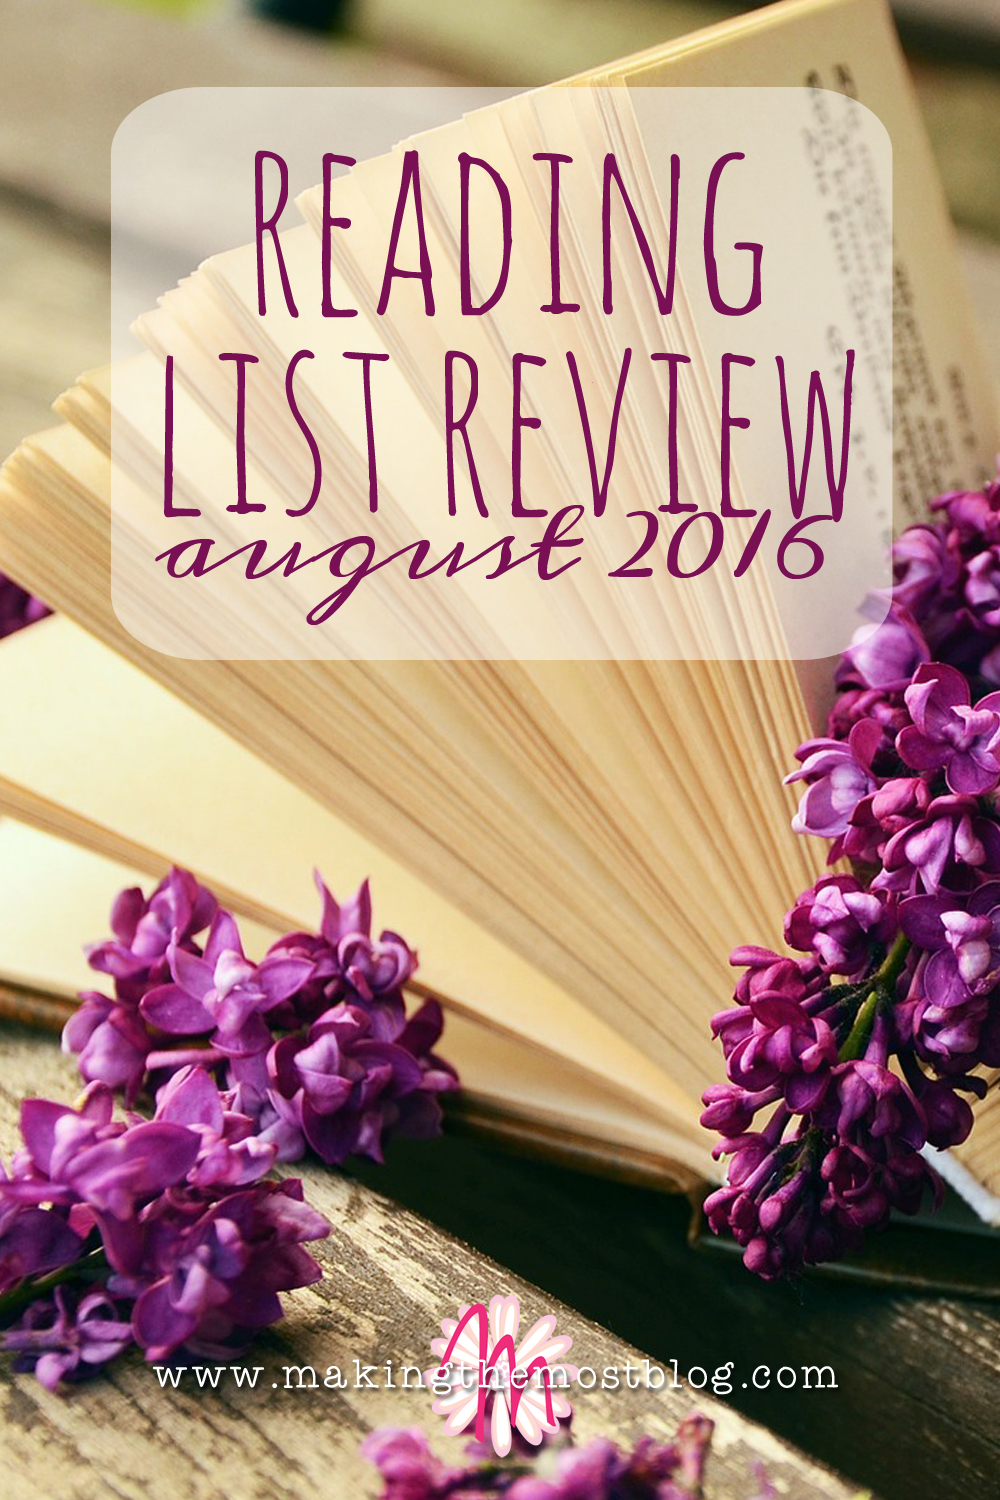 Reading List Review: August 2016 | Making the Most Blog